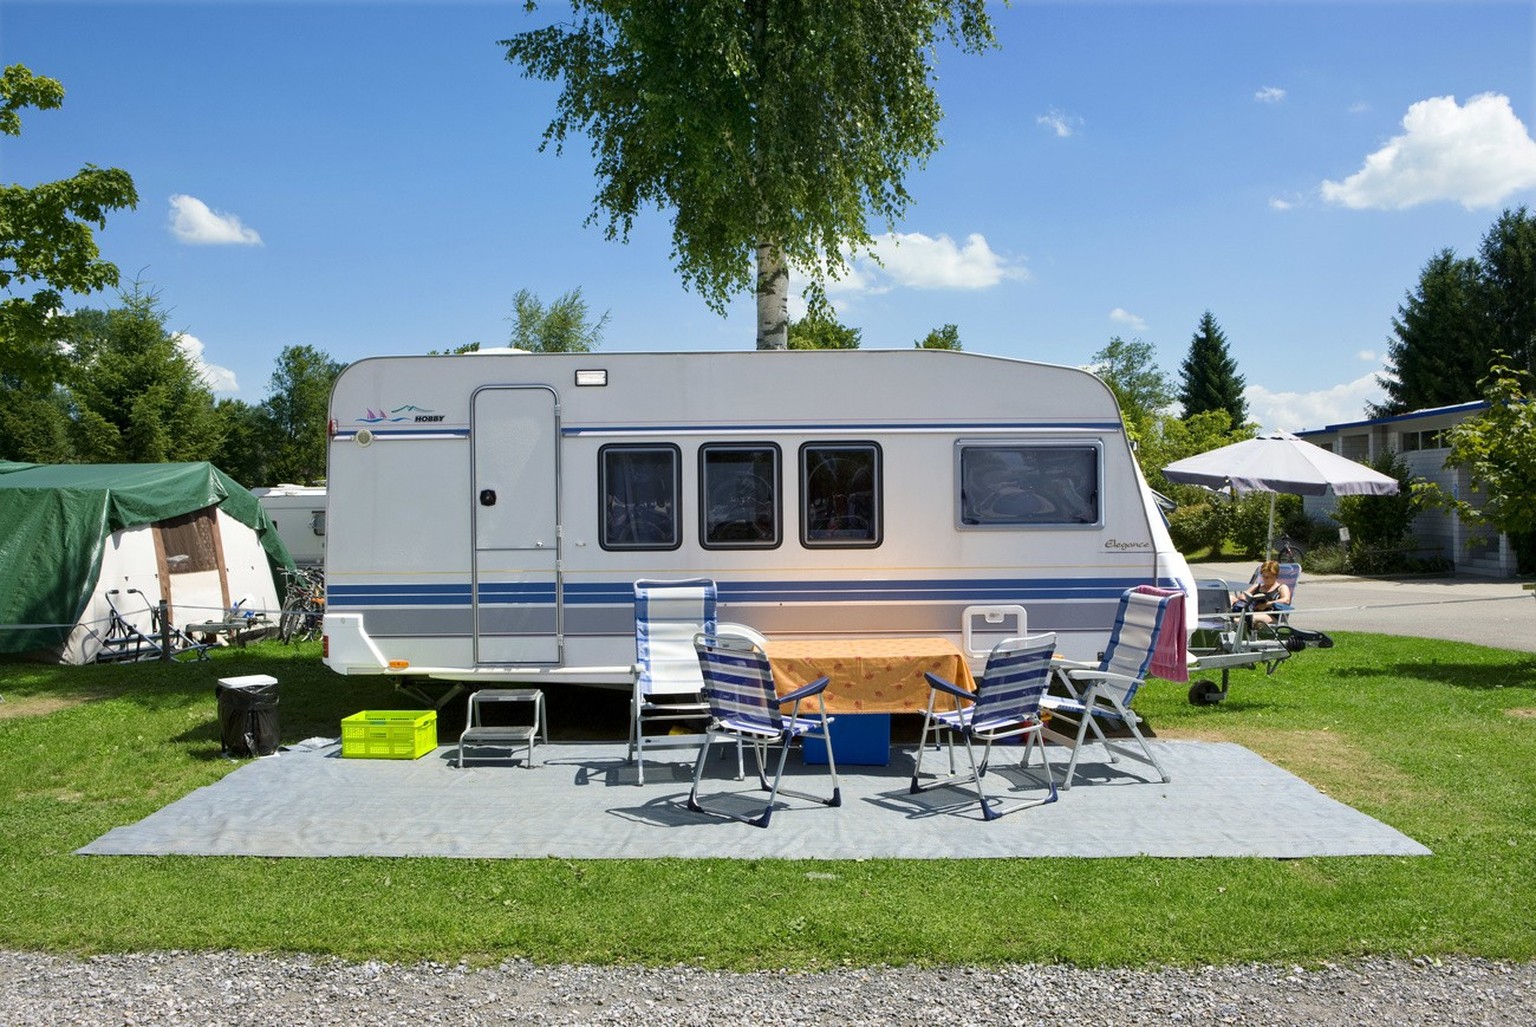 A camper with camping furniture, pictured on the campground &quot;Seeland&quot; in Sempach in the canton of Lucerne, Switzerland on July 23, 2008. (KEYSTONE/Martin Ruetschi)

Wohnwagen mit Campingmoeb ...